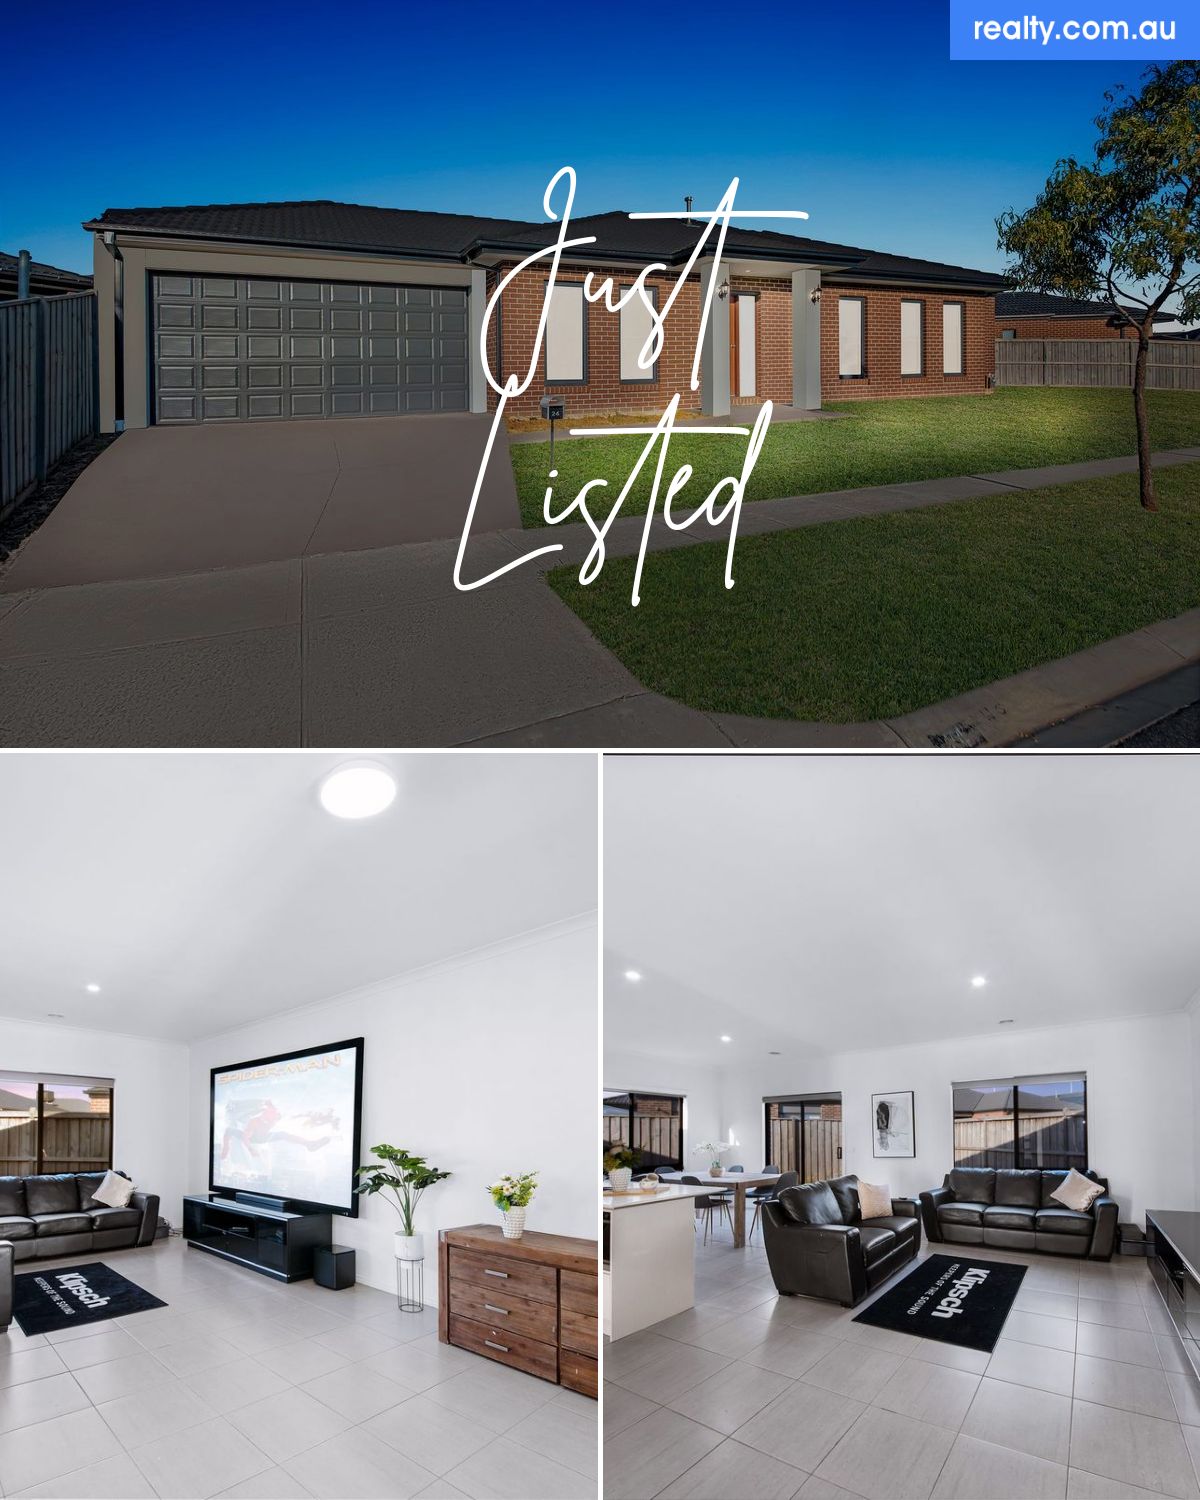 24 Rowling Drive, Officer, VIC 3809 | Realty.com.au